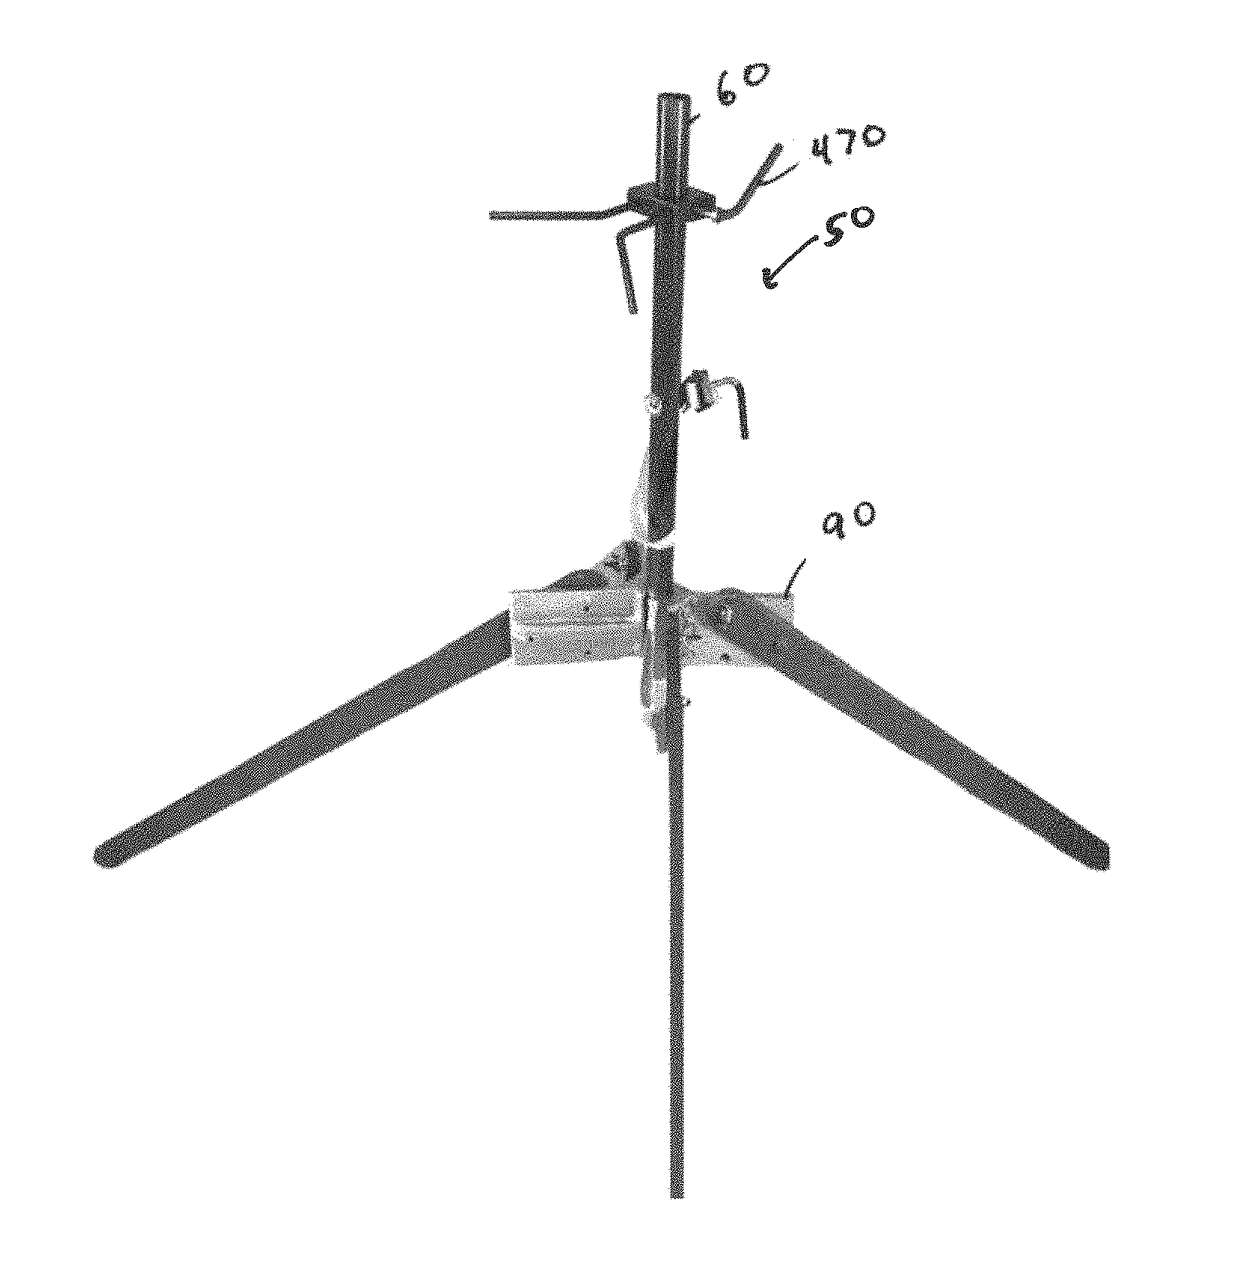 Stand that holds an item or object in an upright manner